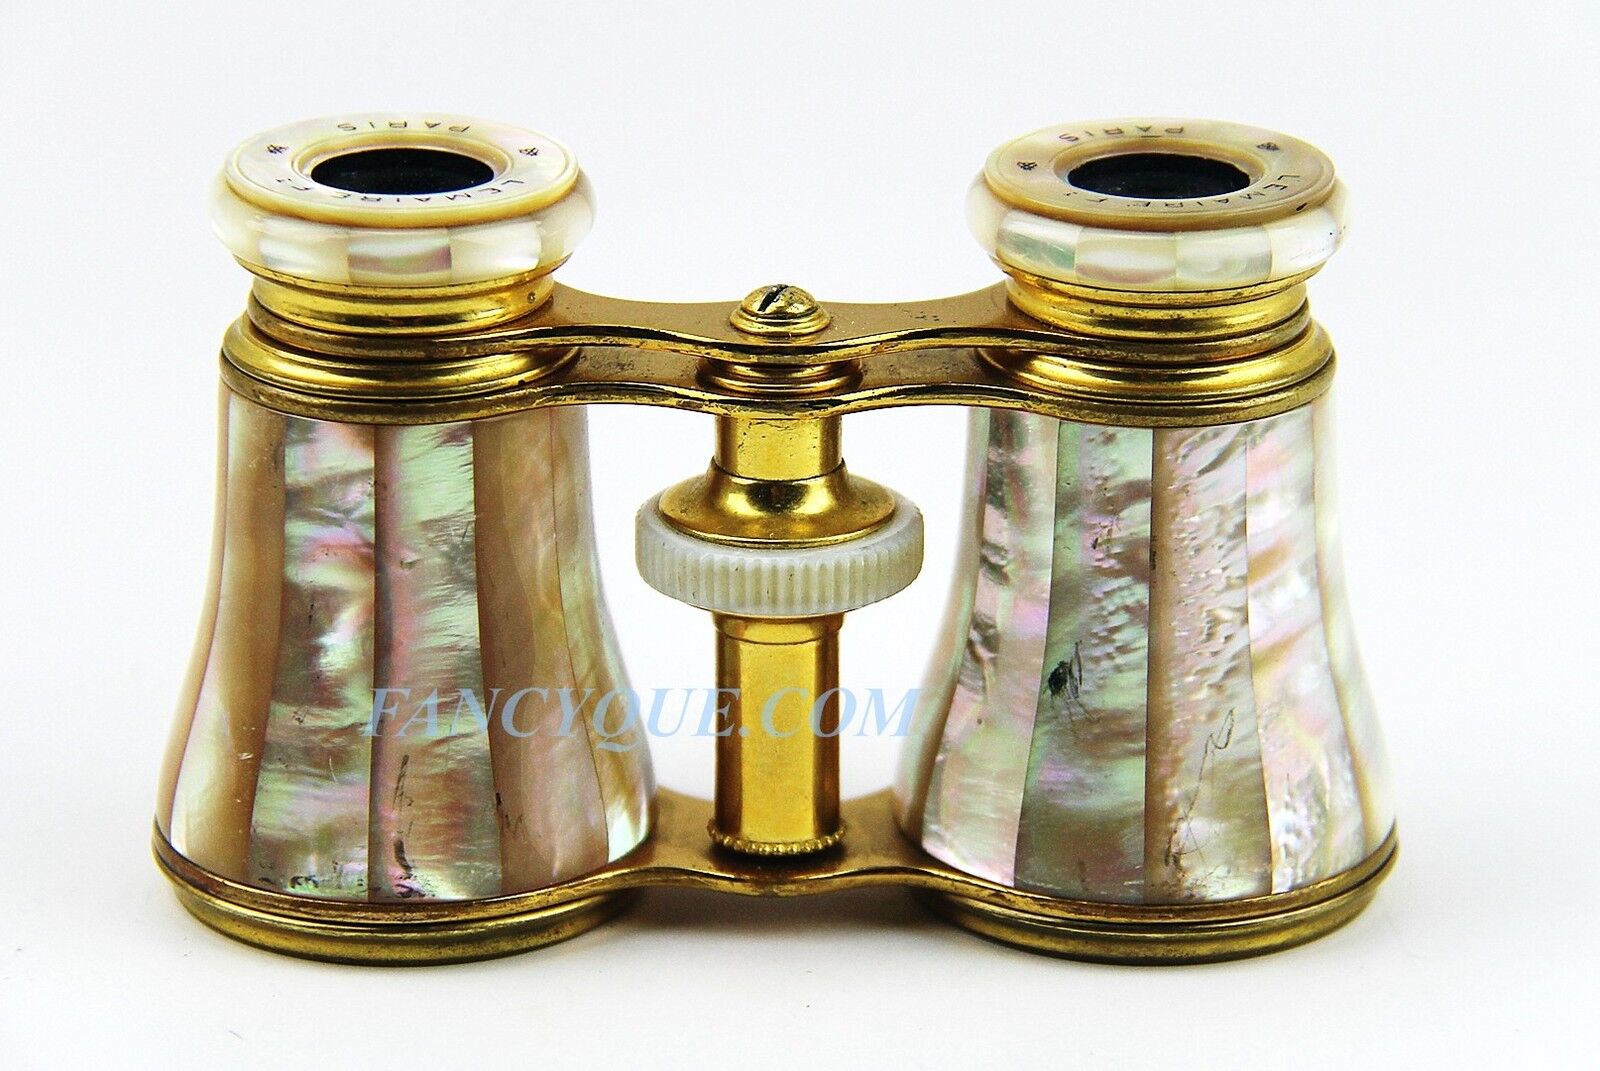 ANTIQUE FRENCH OPERA GLASSES WITH AMAZING RAINBOW MOTHER OF PEARL # 123